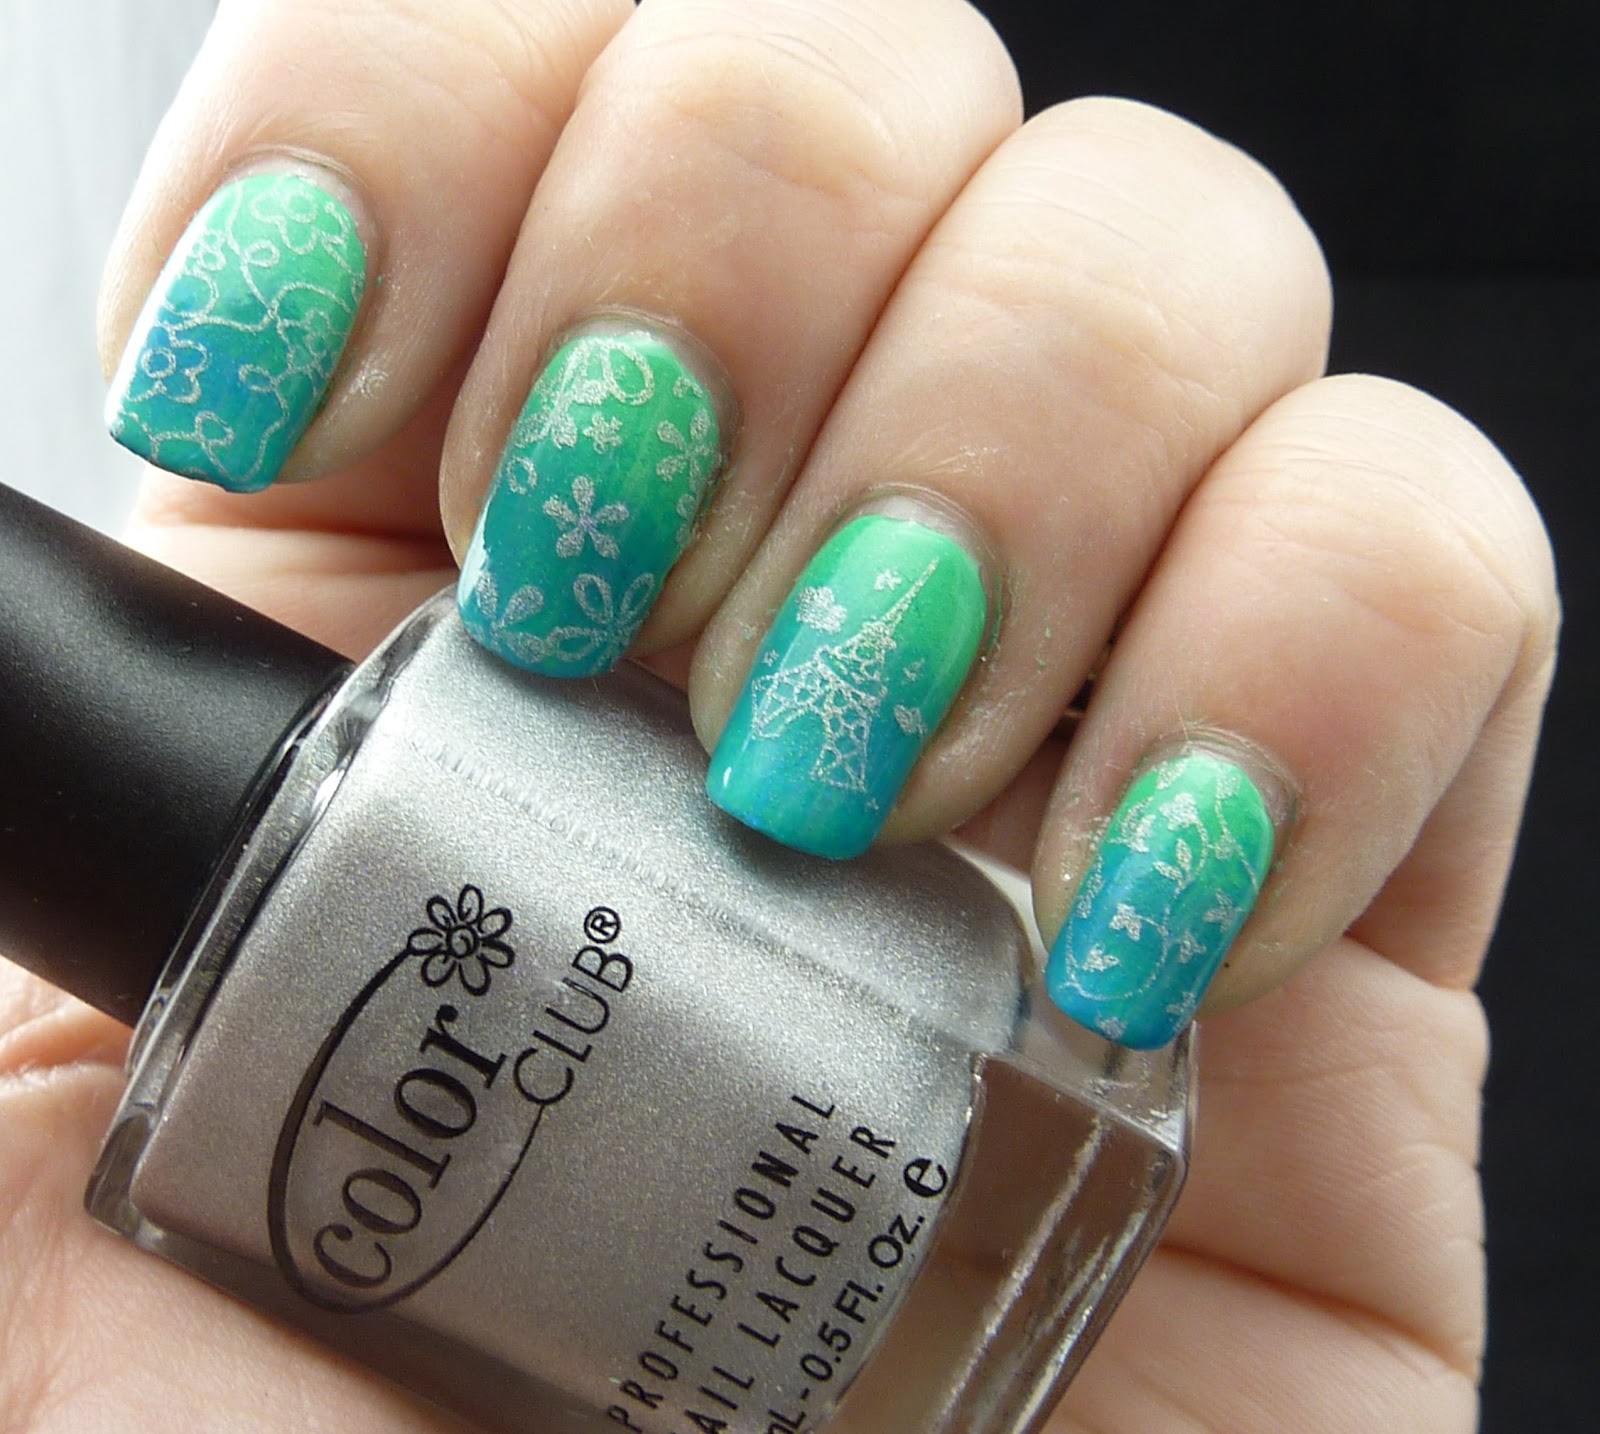 Jas's Blingtastic Nails: Green and Blue Gradient with Stamping